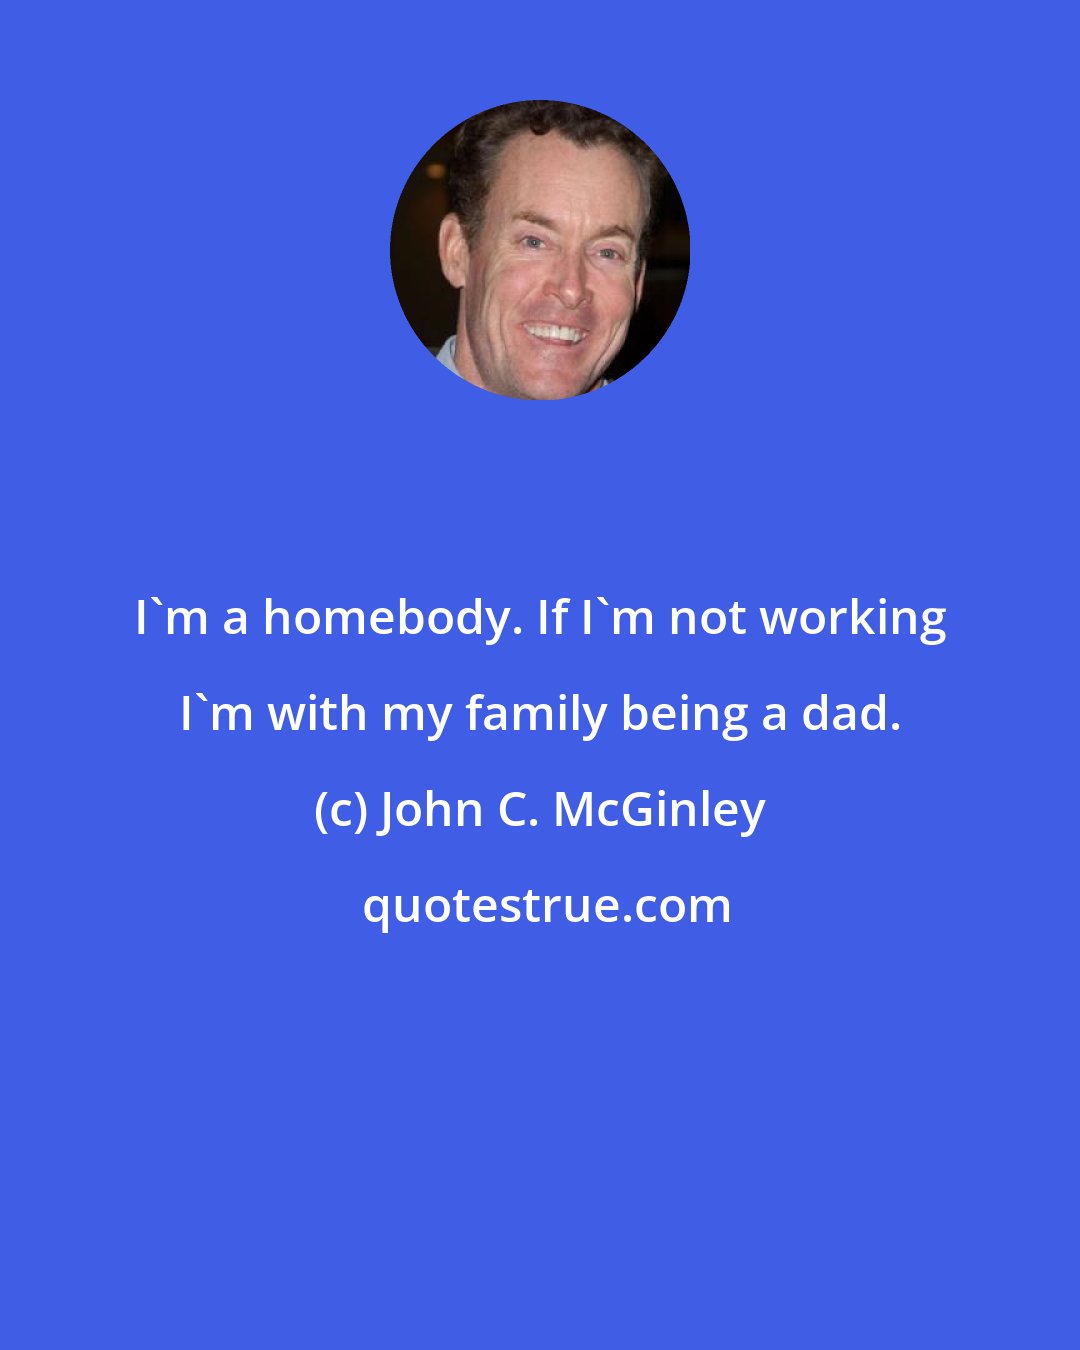 John C. McGinley: I'm a homebody. If I'm not working I'm with my family being a dad.